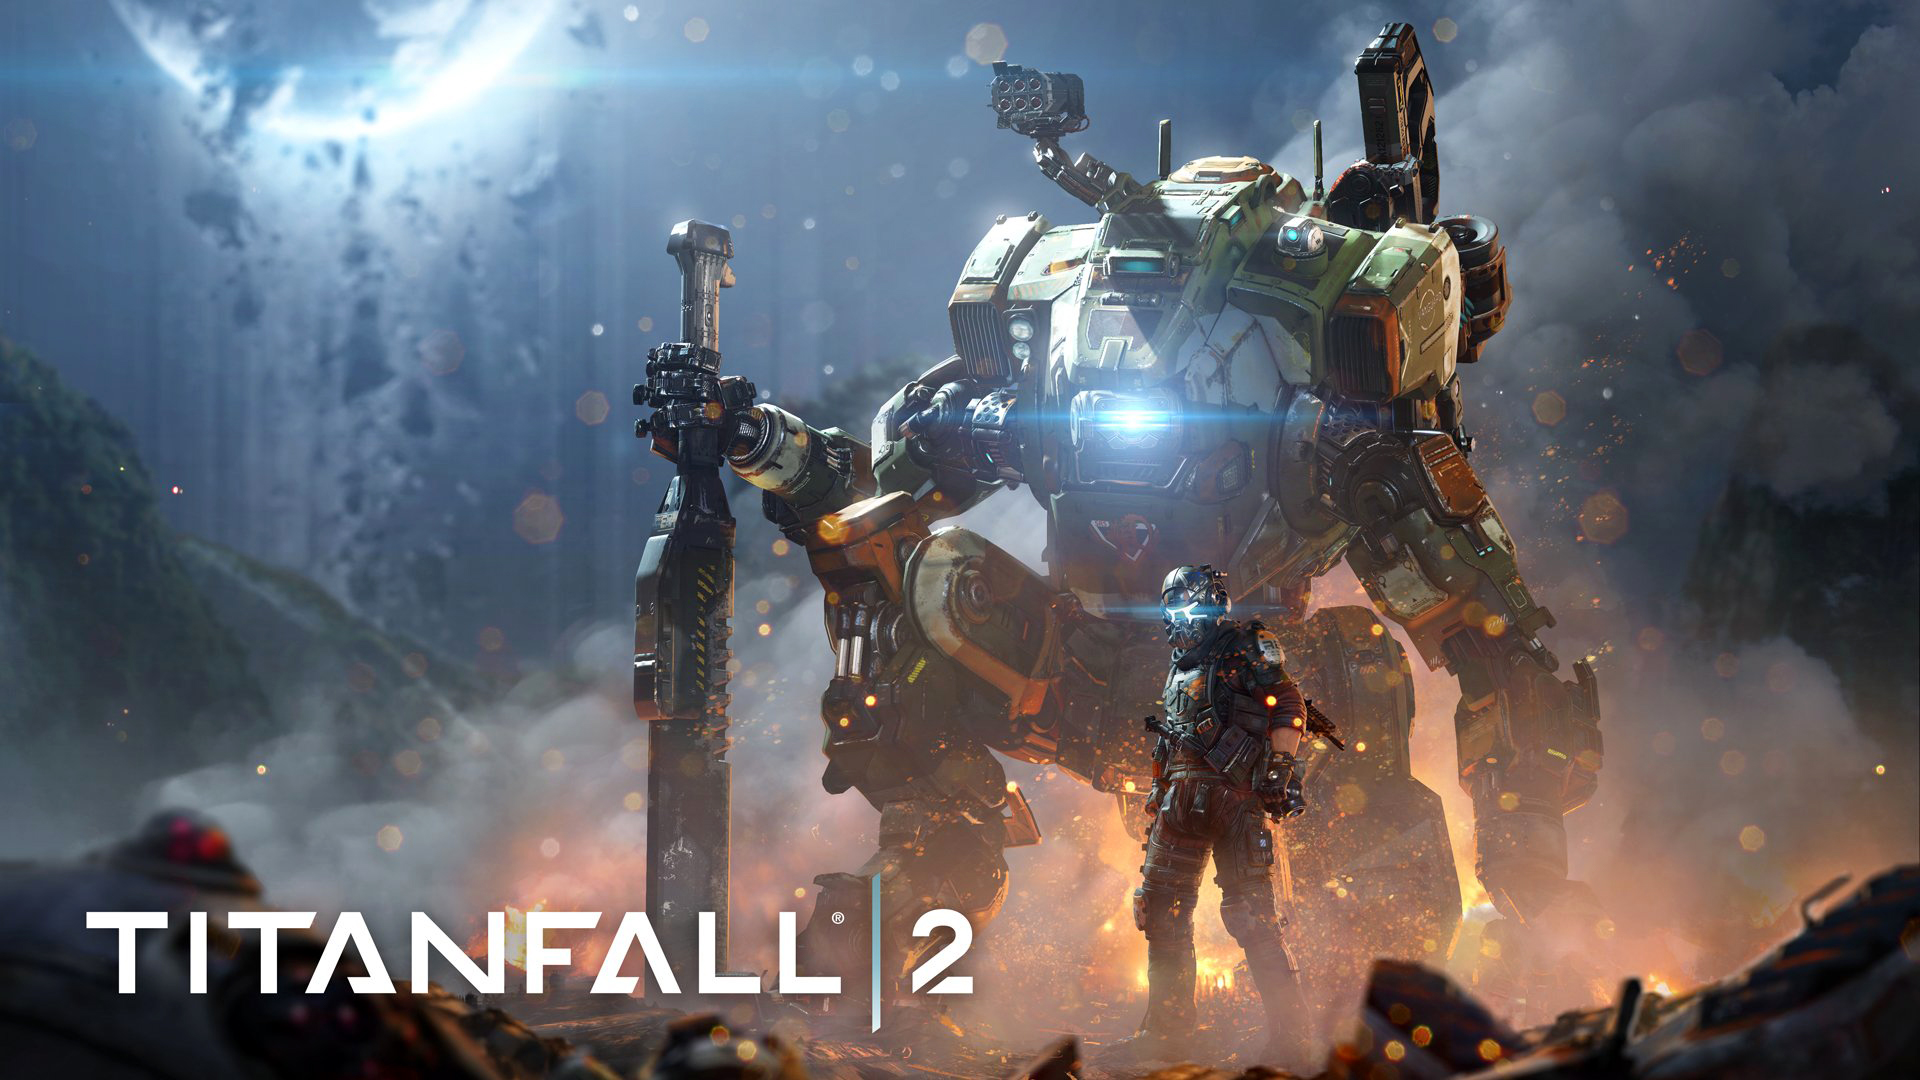 General 1920x1080 Titanfall 2 video games Titanfall video game art science fiction futuristic